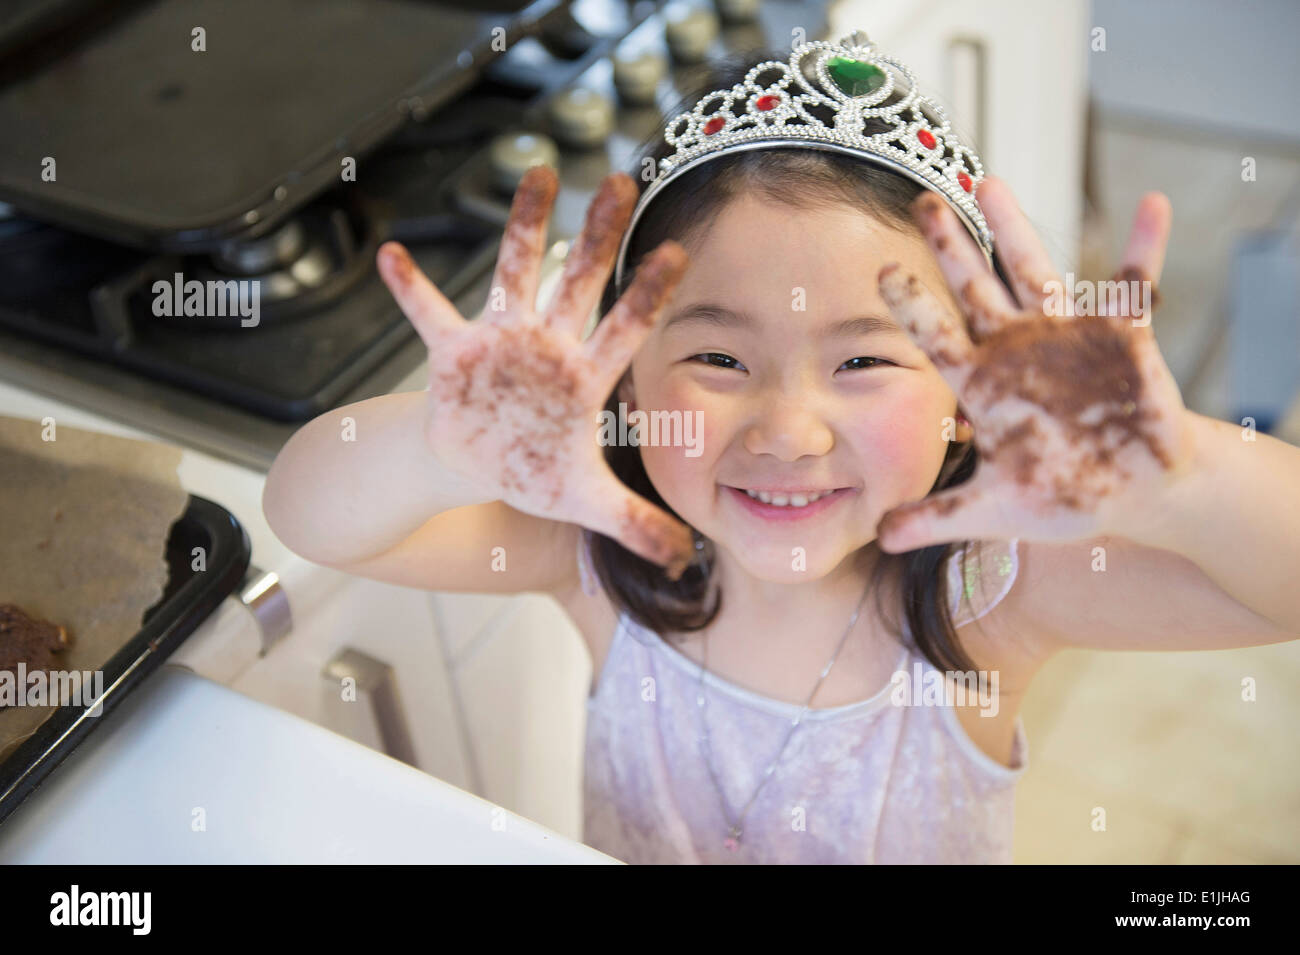 Girl with dirty hands, wearing crown Stock Photo